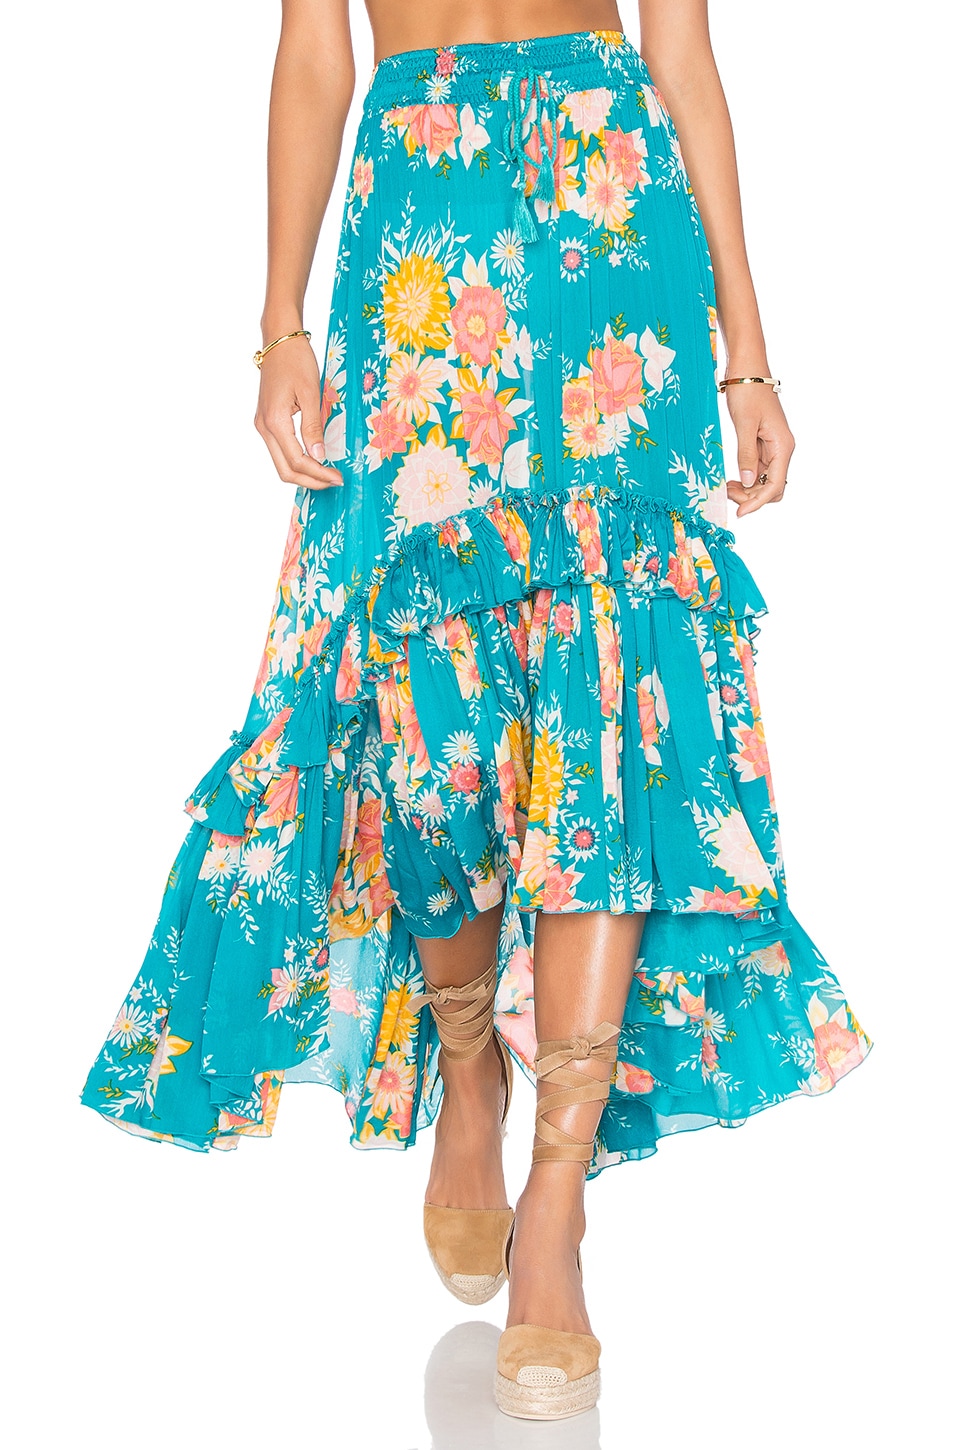 Spell & The Gypsy Collective Jagger Maxi Skirt in Teal | REVOLVE